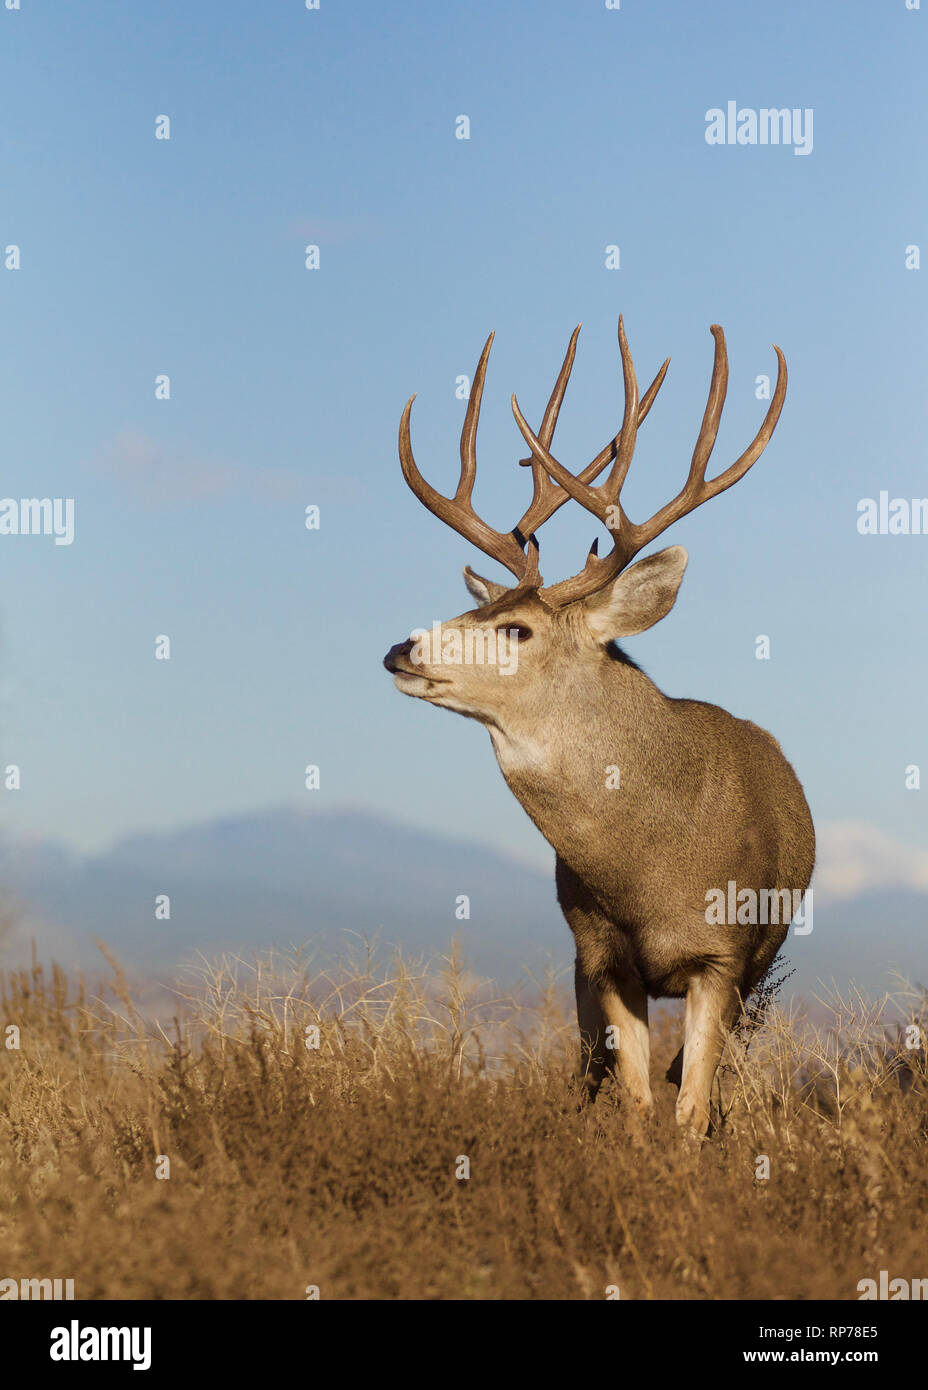 Trophy-class Mule Deer buck in prairie landscape with a clear blue sky and the Rocky Mountains off in the distance Stock Photo